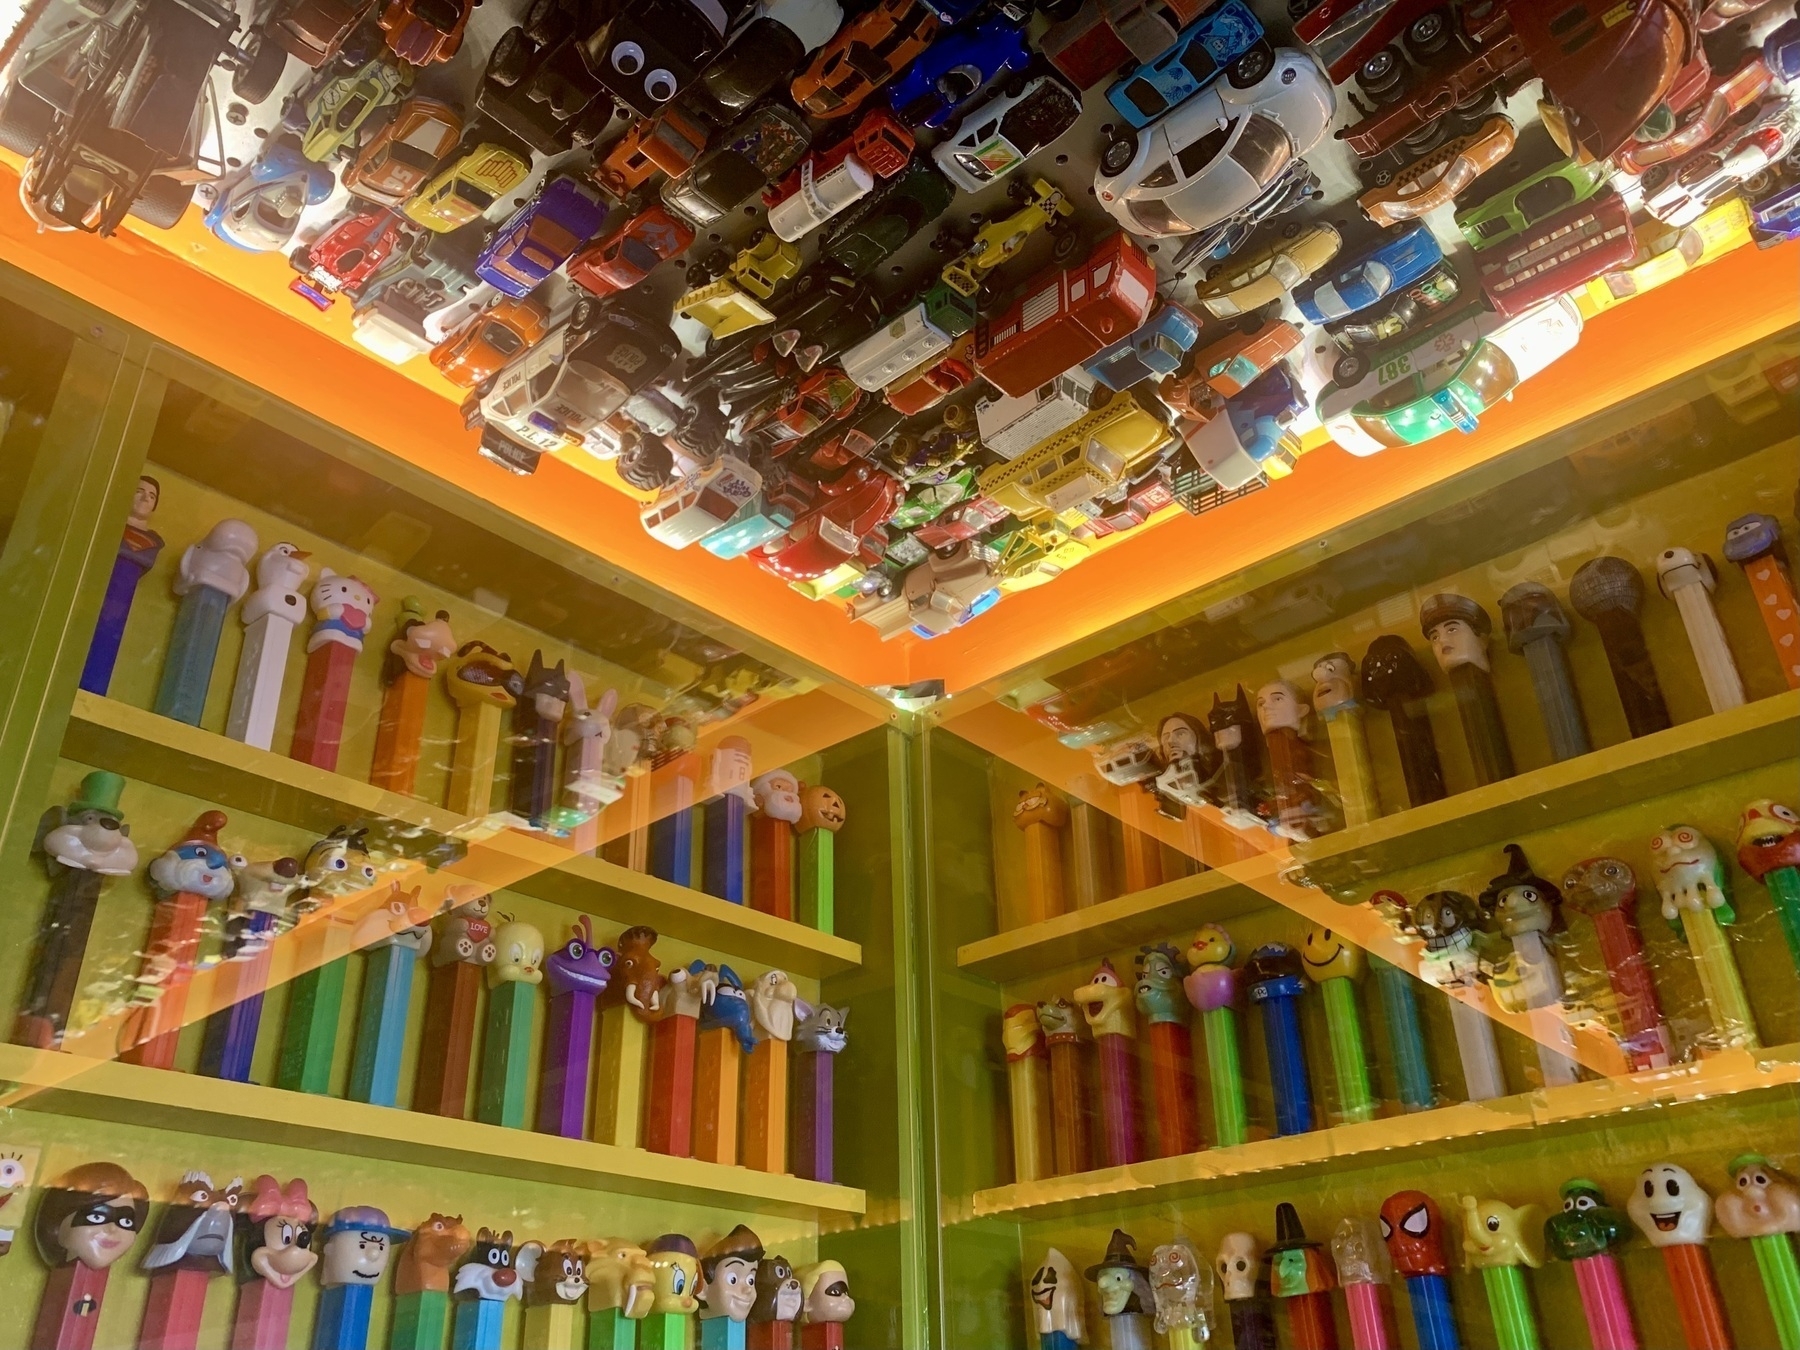 A wall corner with rows of Pez dispensers packed like sardines on both sides and toy cars glued to the ceiling.